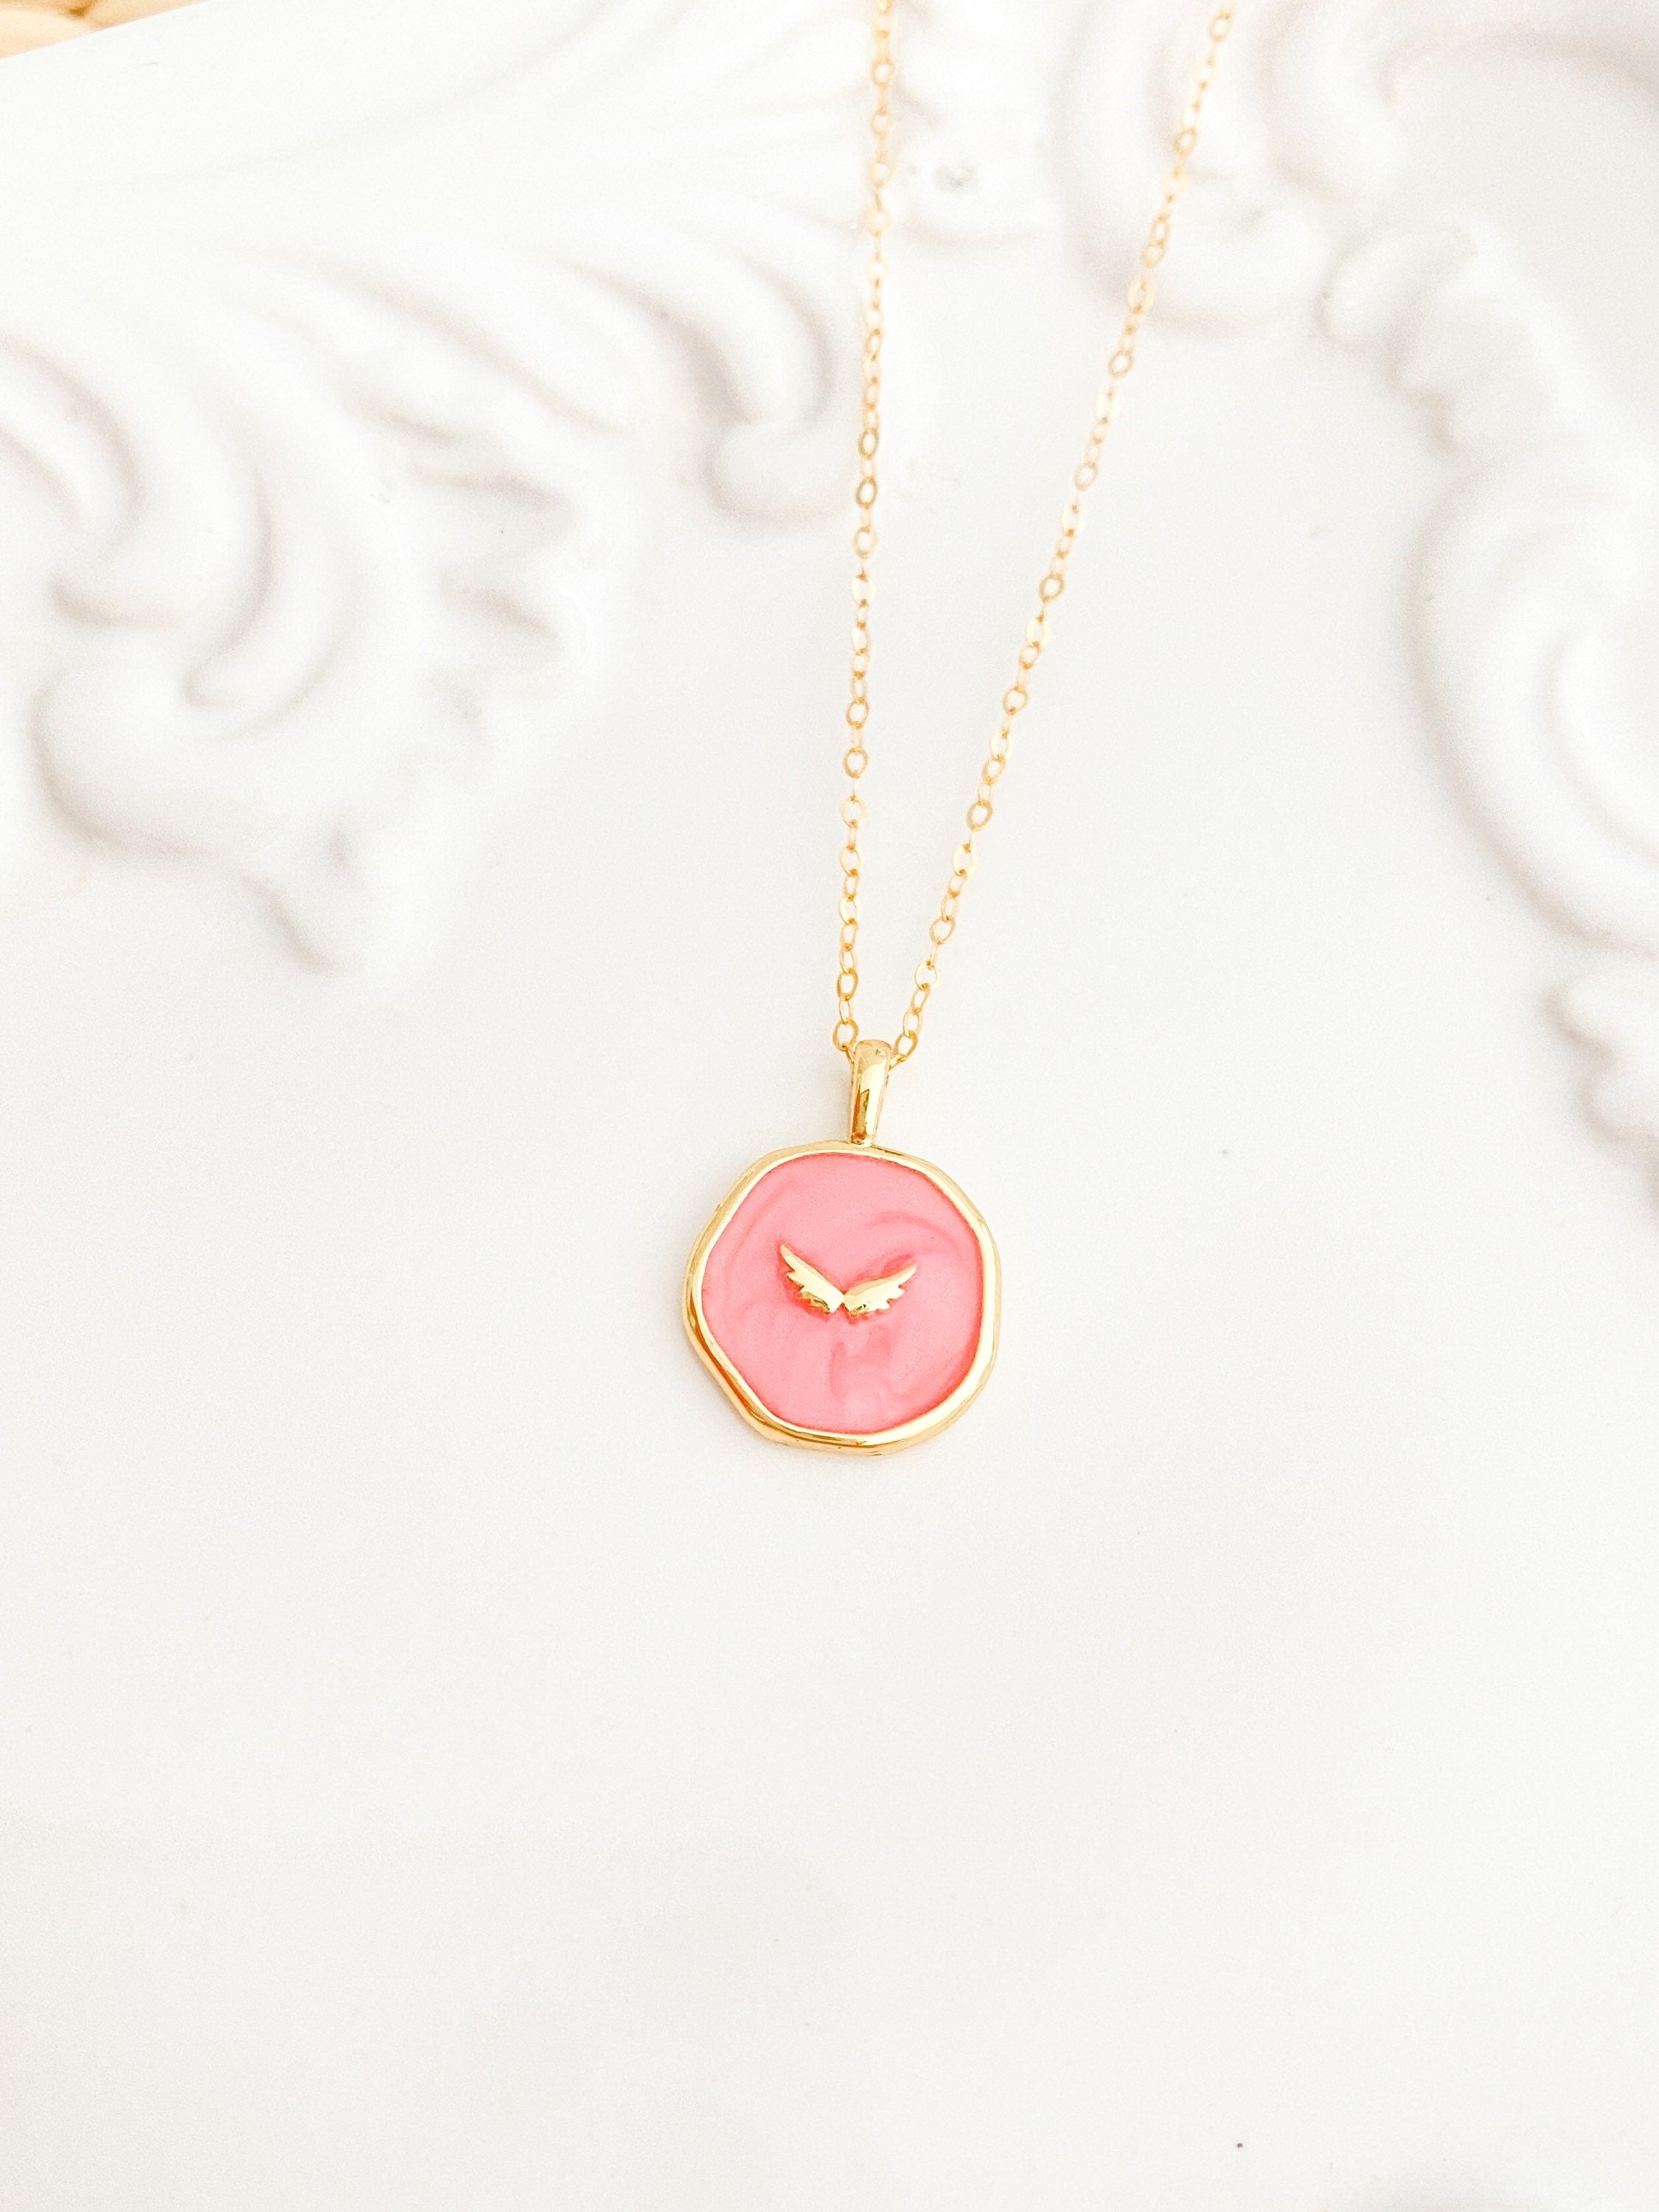 Sympathy Gift, Angel Wing Necklace, Gifts for her, dainty gold necklace